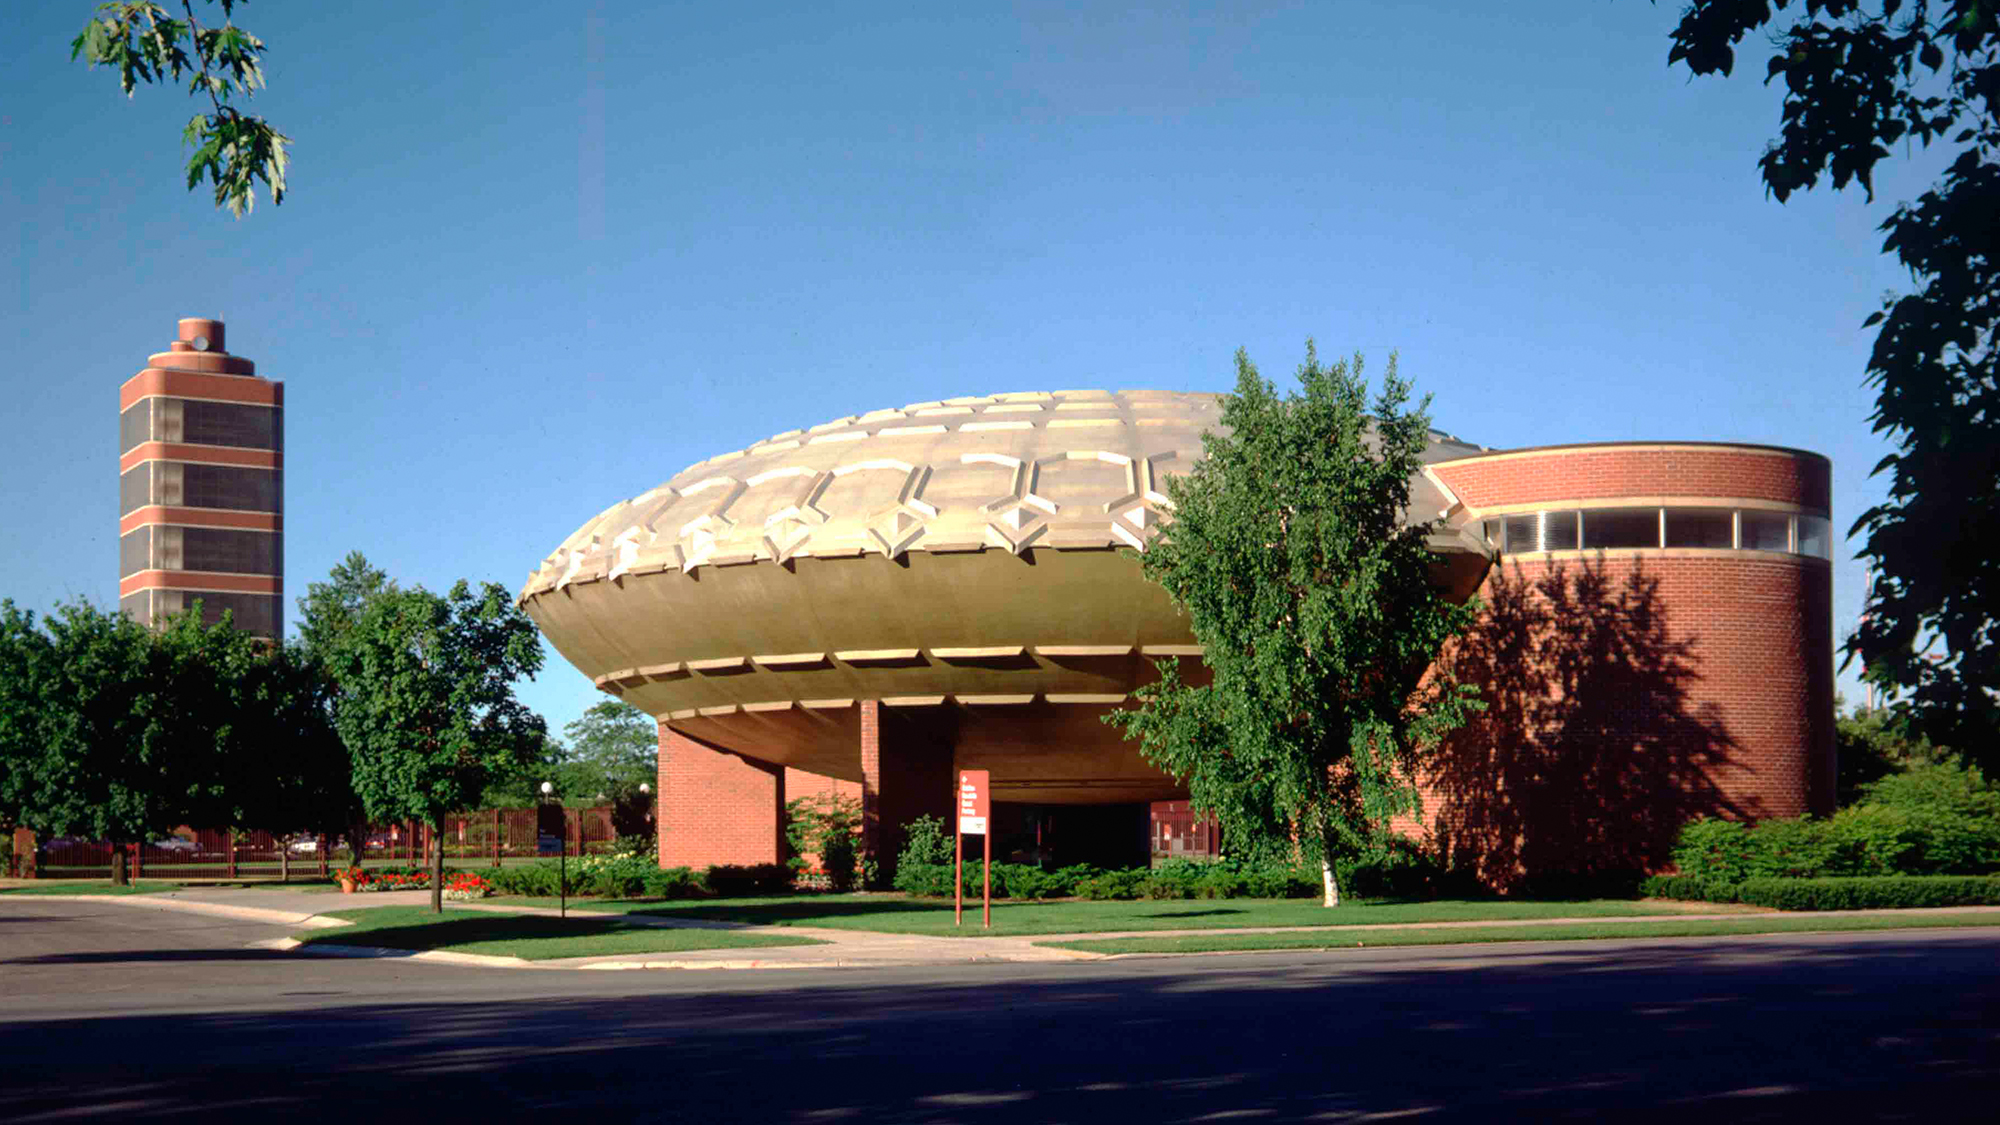 The Golden Rondelle Theatre sits at the entrance to our global headquarters campus.